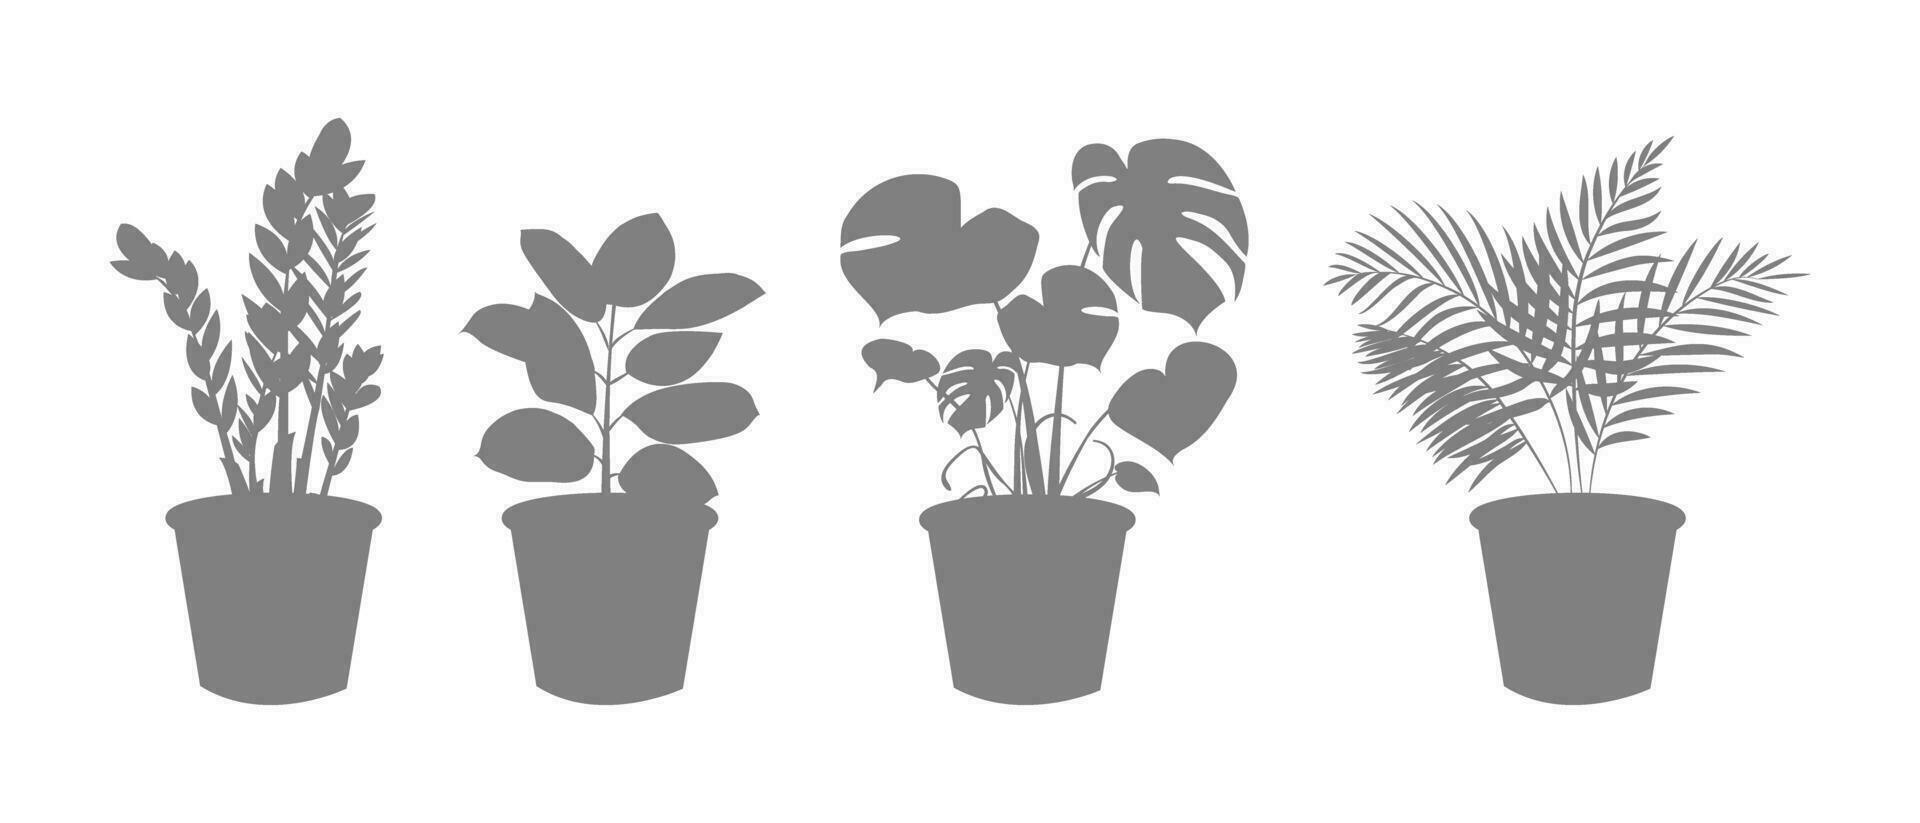 Decorative indoor plants in a pot silhouette. Zamiokulkas Dollar Tree, Ficus and Monstera, palm plant in pot. Home flowers icons for gardening. Vector illustration.